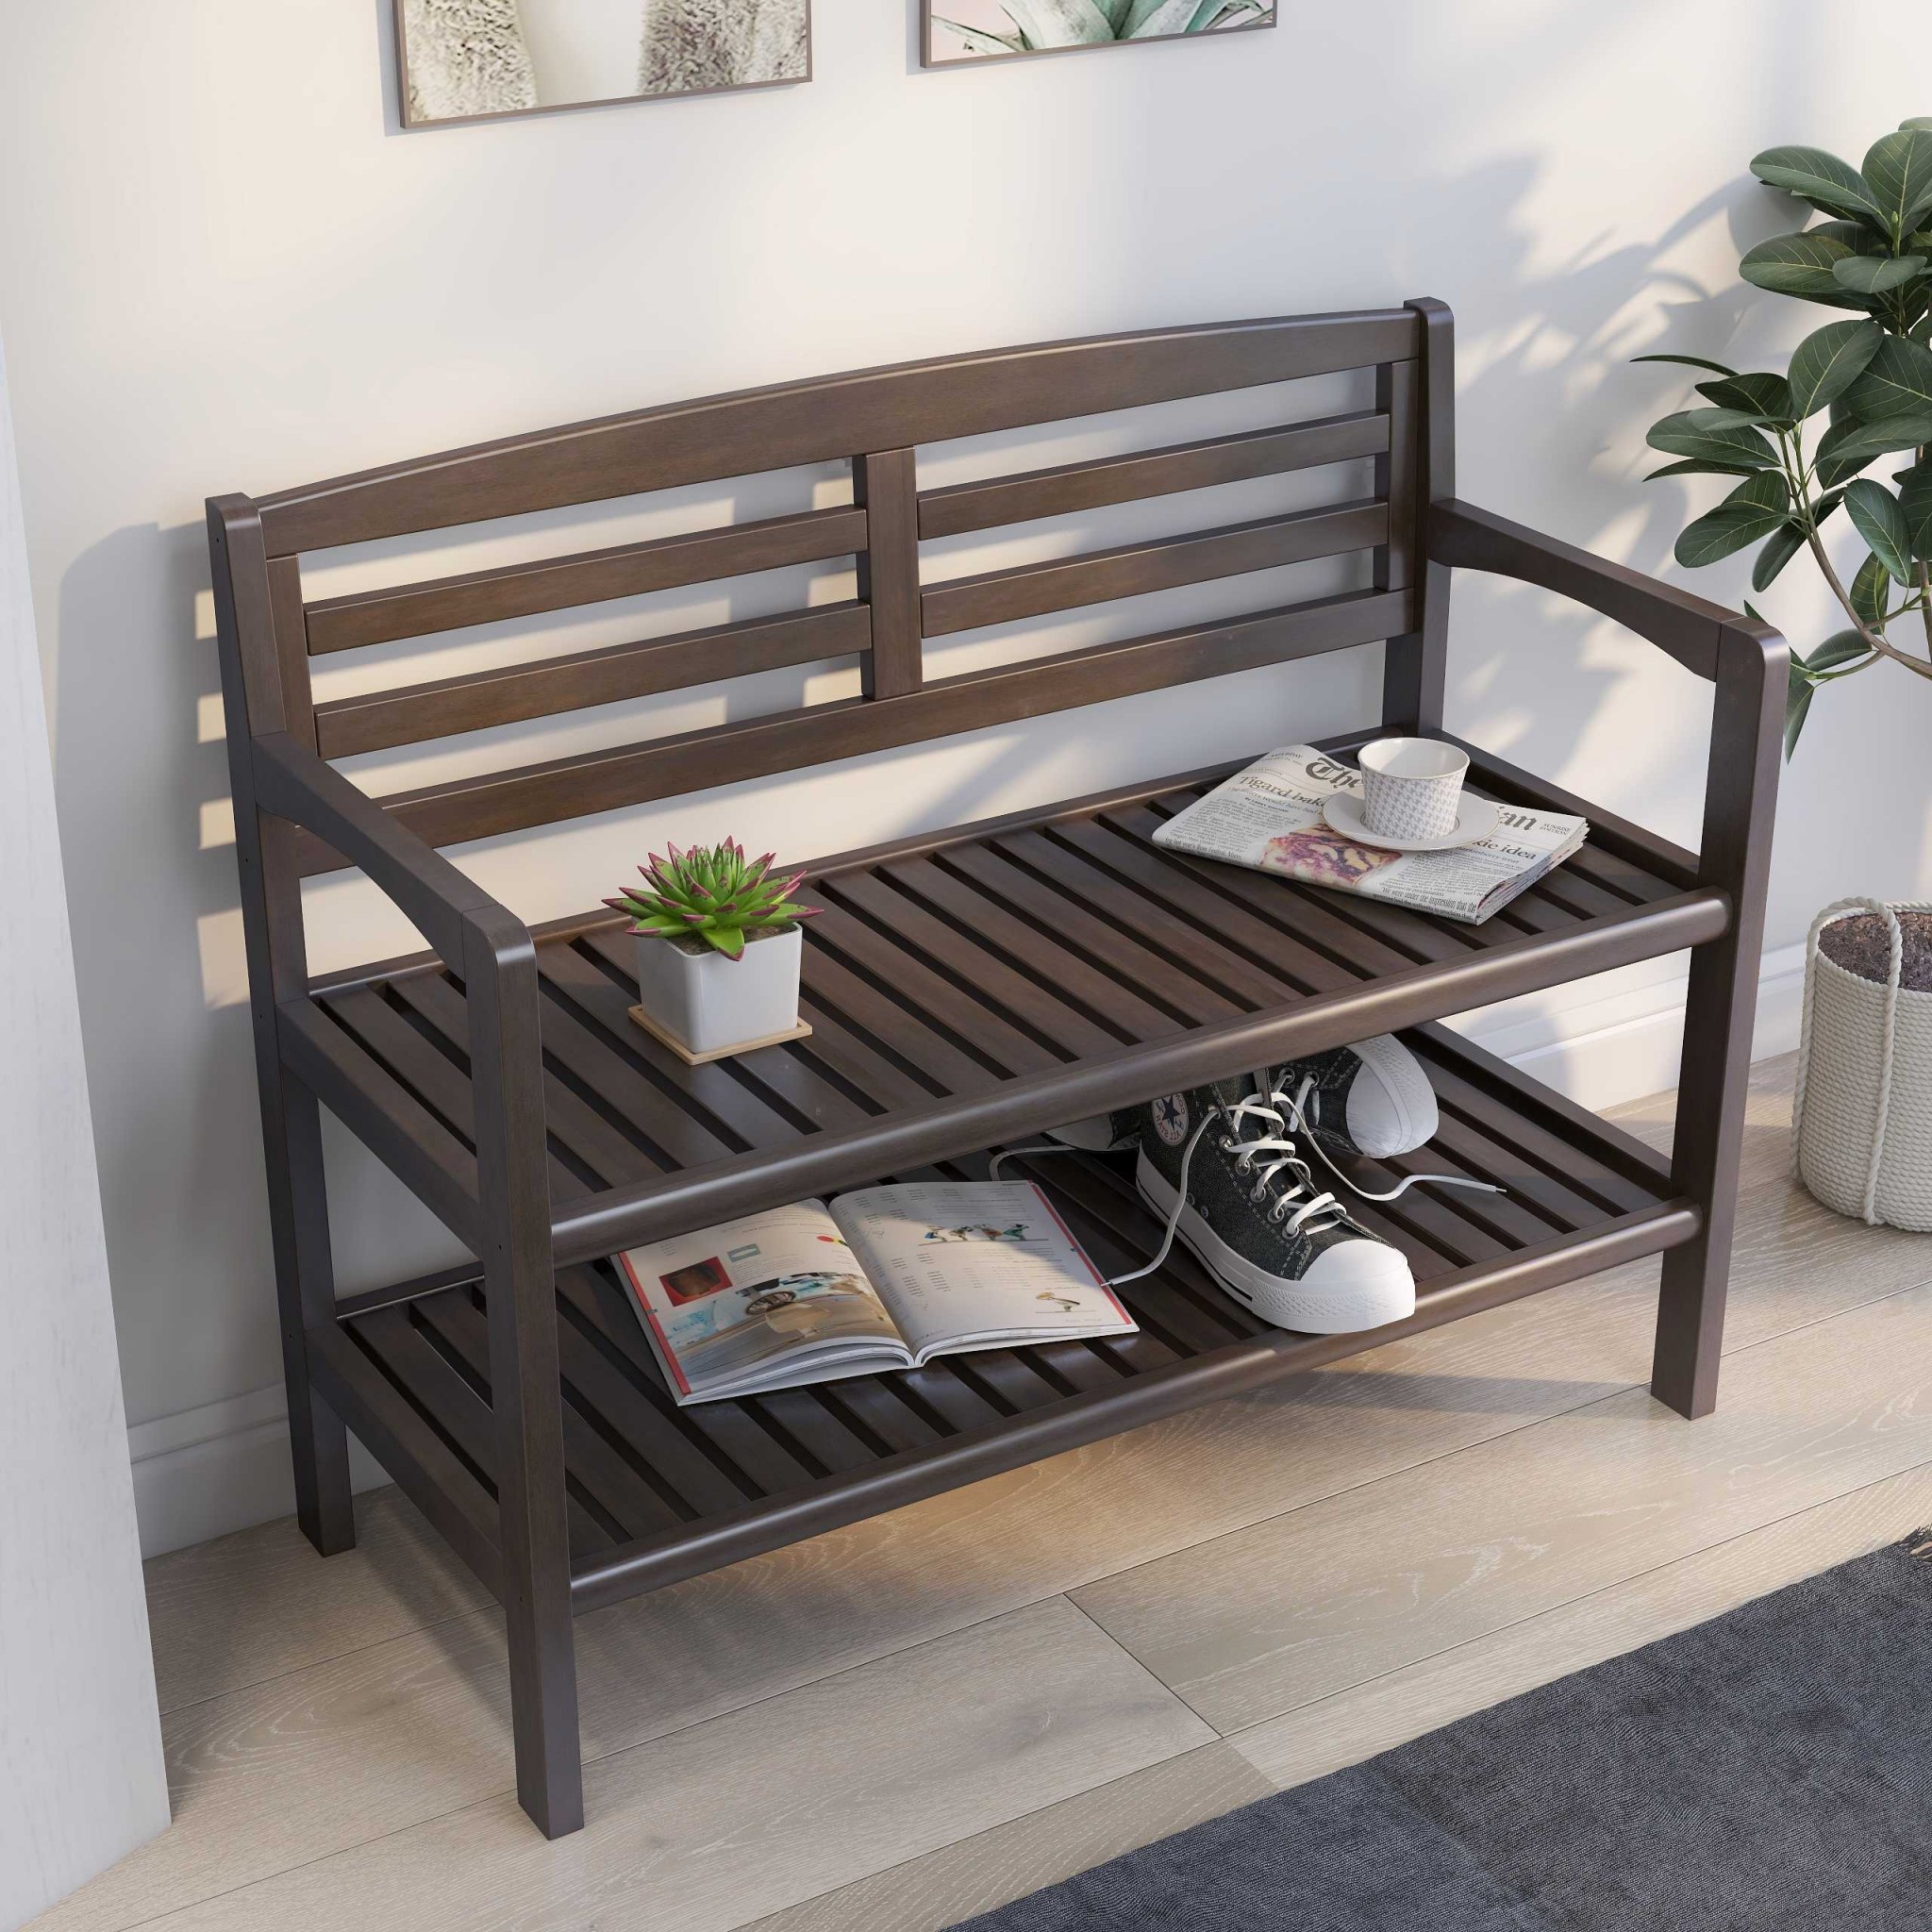 Rectangular Wood Bench with Back and Shelf in Espresso